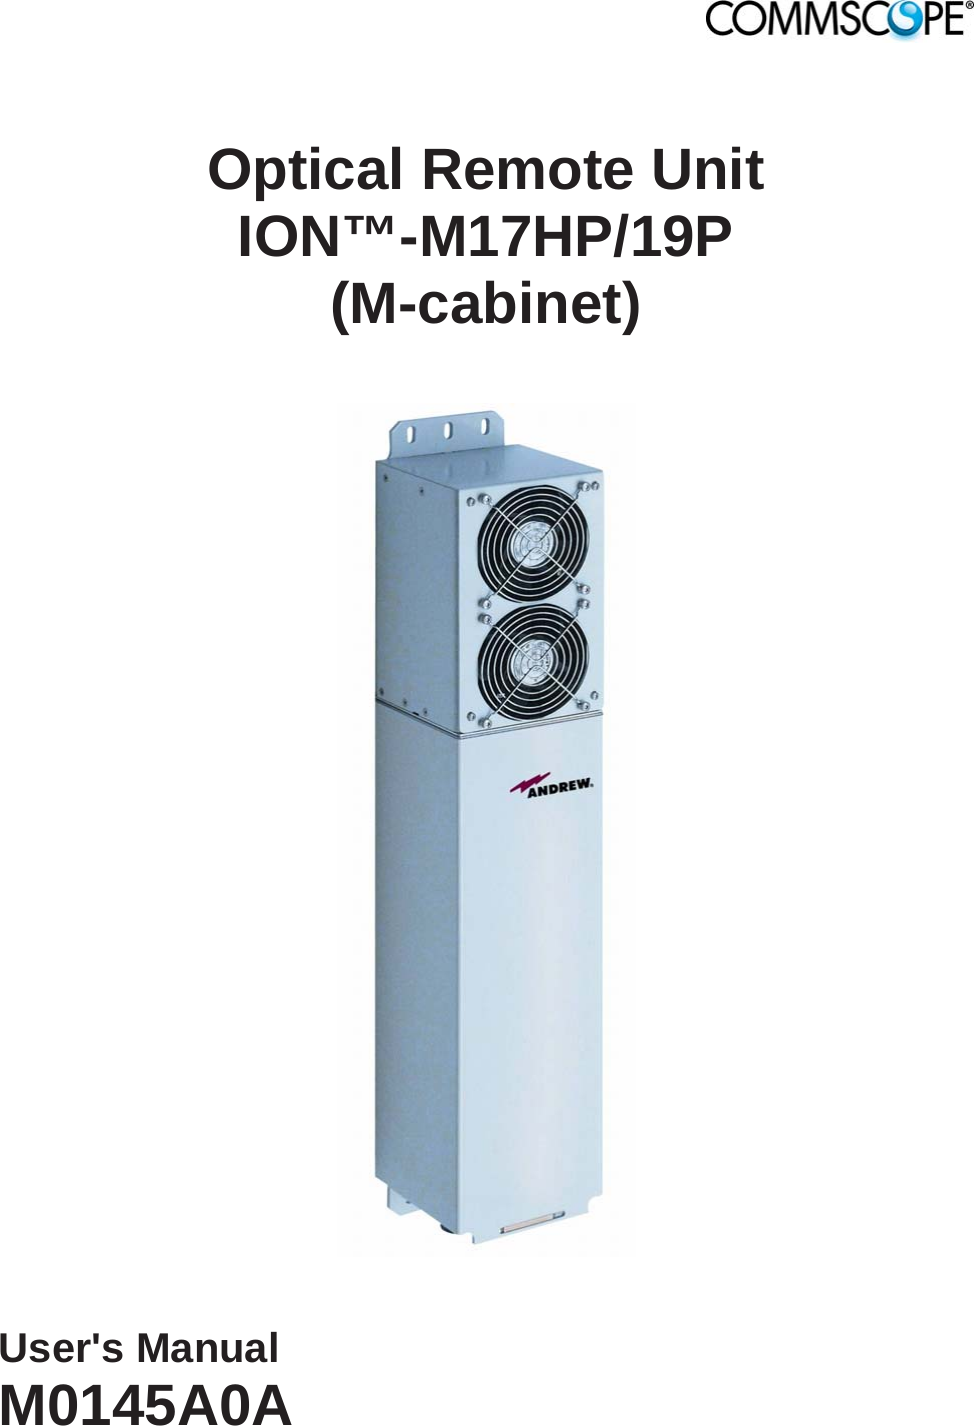   Optical Remote Unit ION™-M17HP/19P (M-cabinet)    User&apos;s Manual M0145A0A  